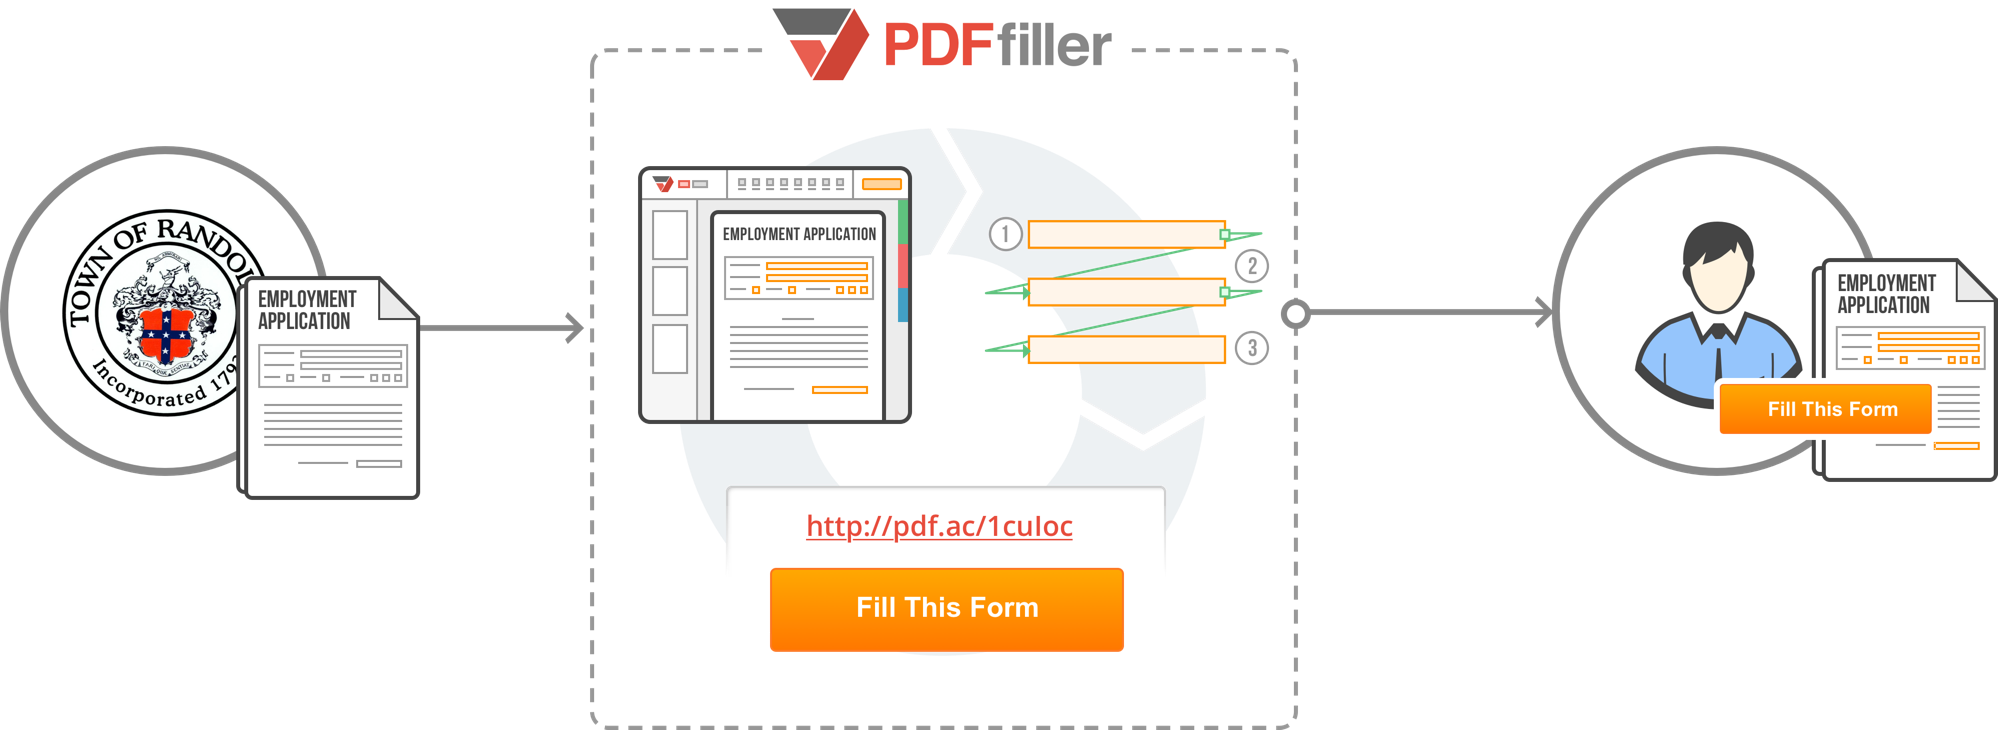 Fig A. – Creating a filliable employment application form with PDFfiller